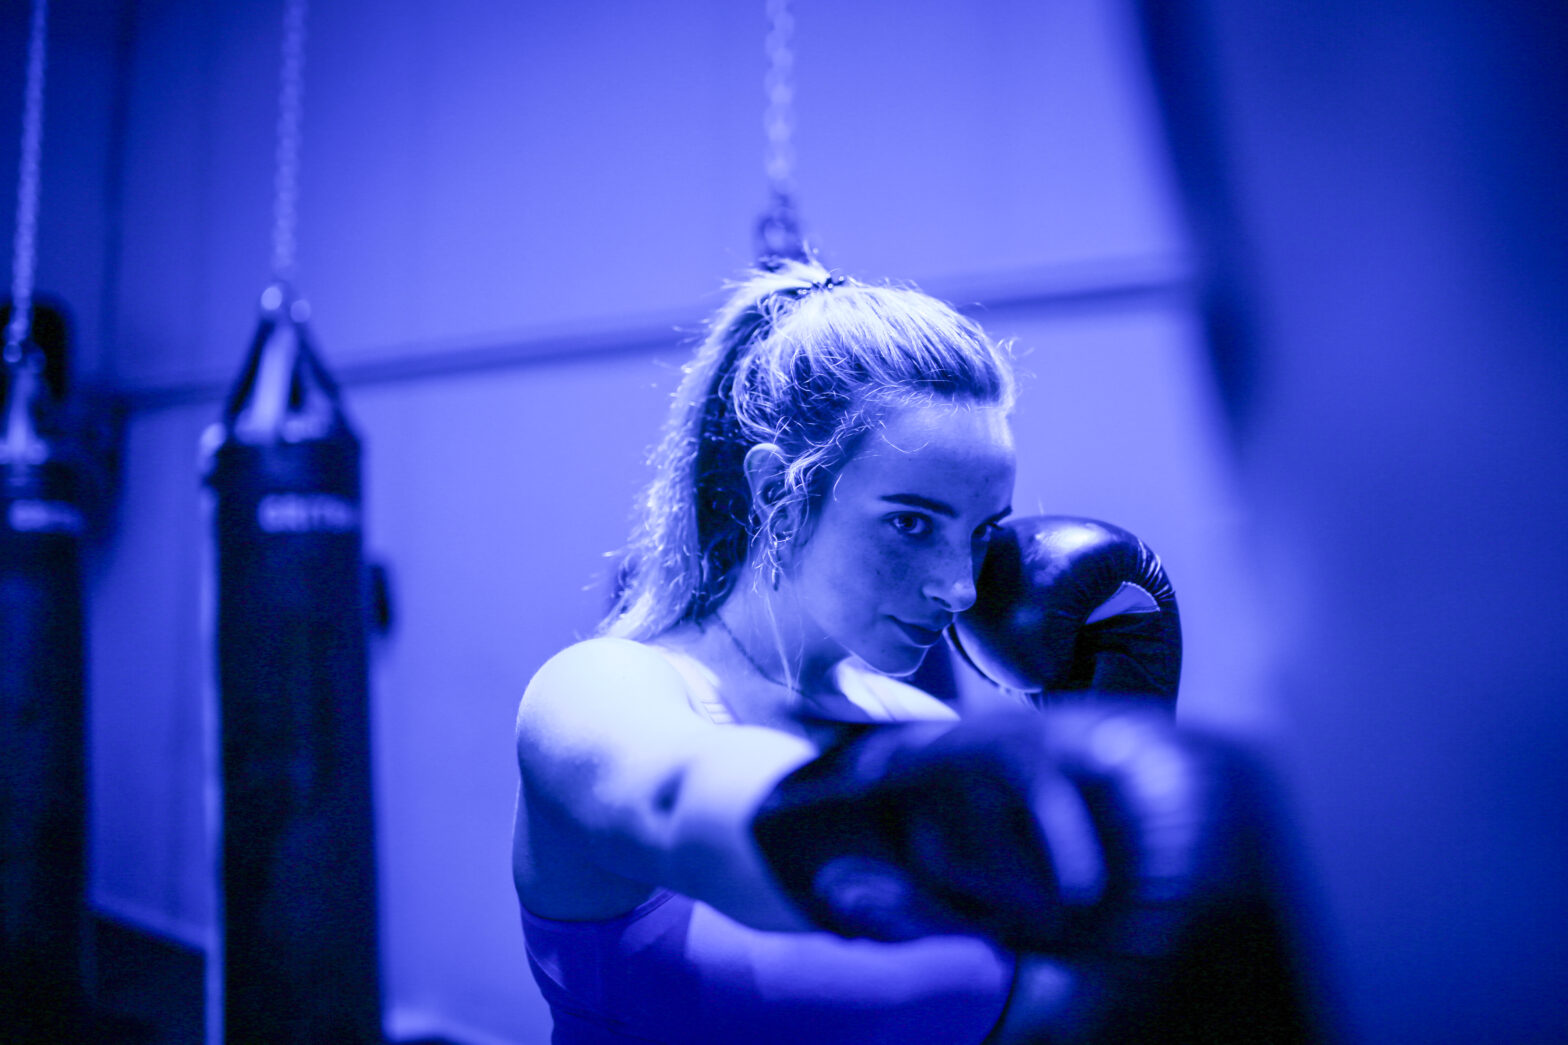 get fit with kickboxing at gritbox